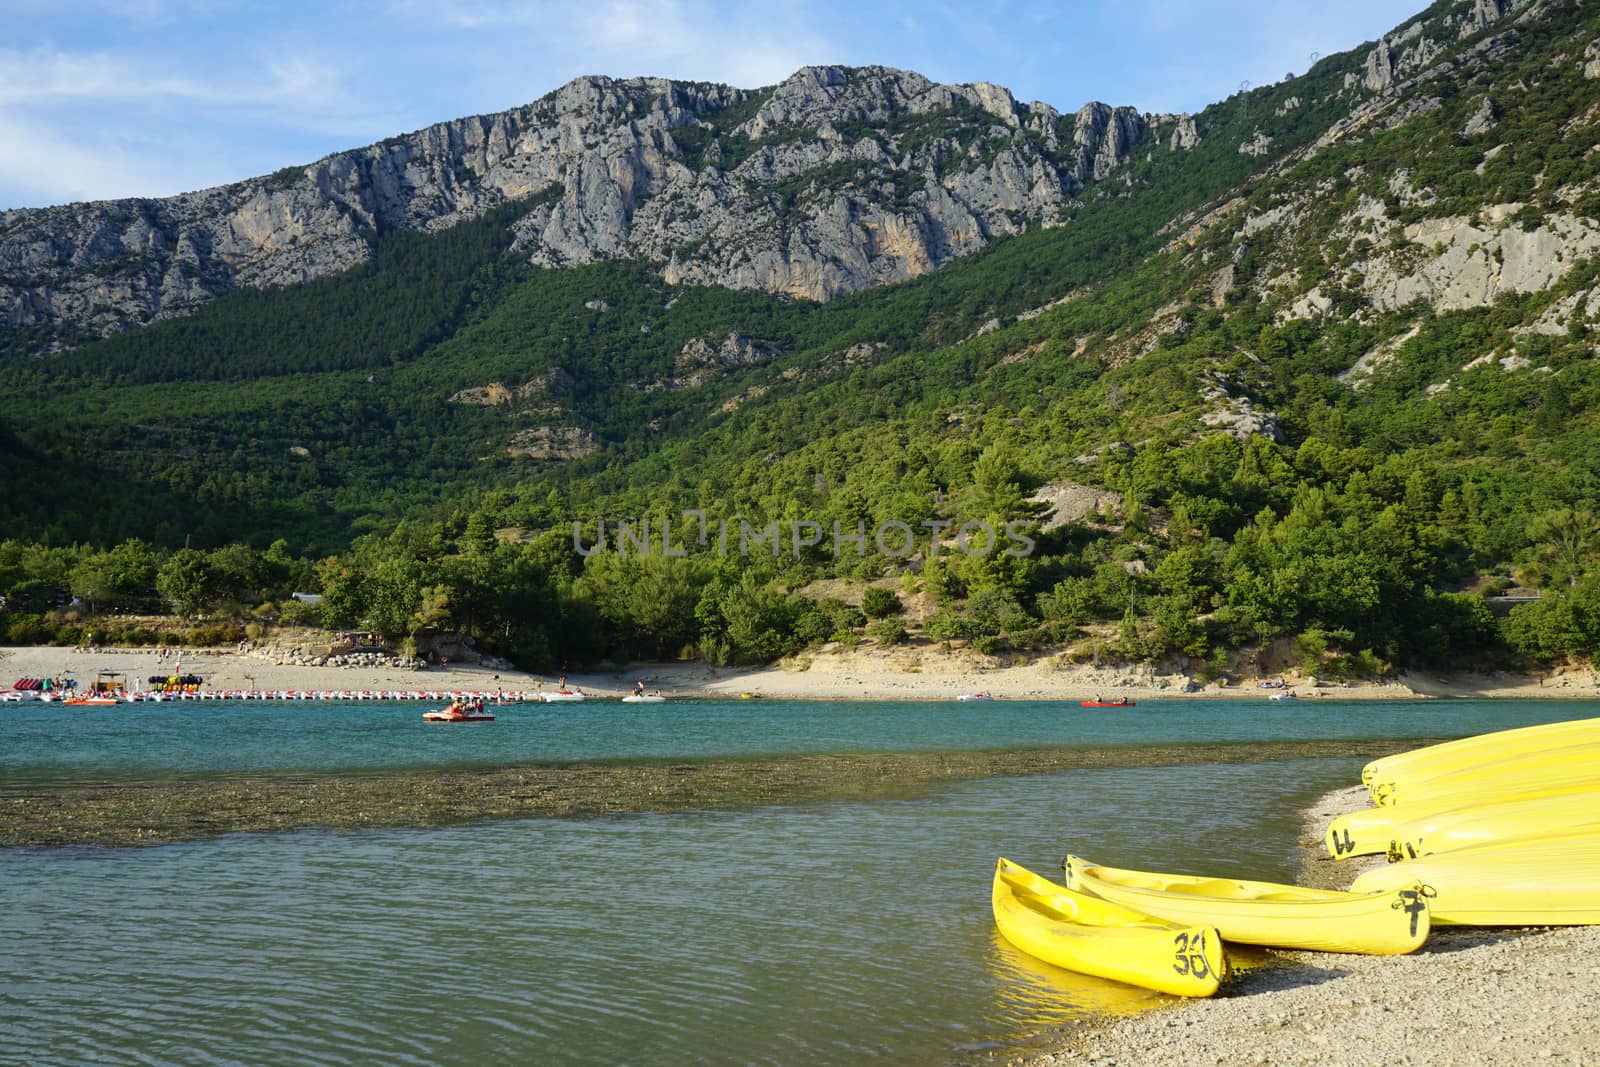 View of Sainte-Croix lake between the Verdon Gorges, France by cosca